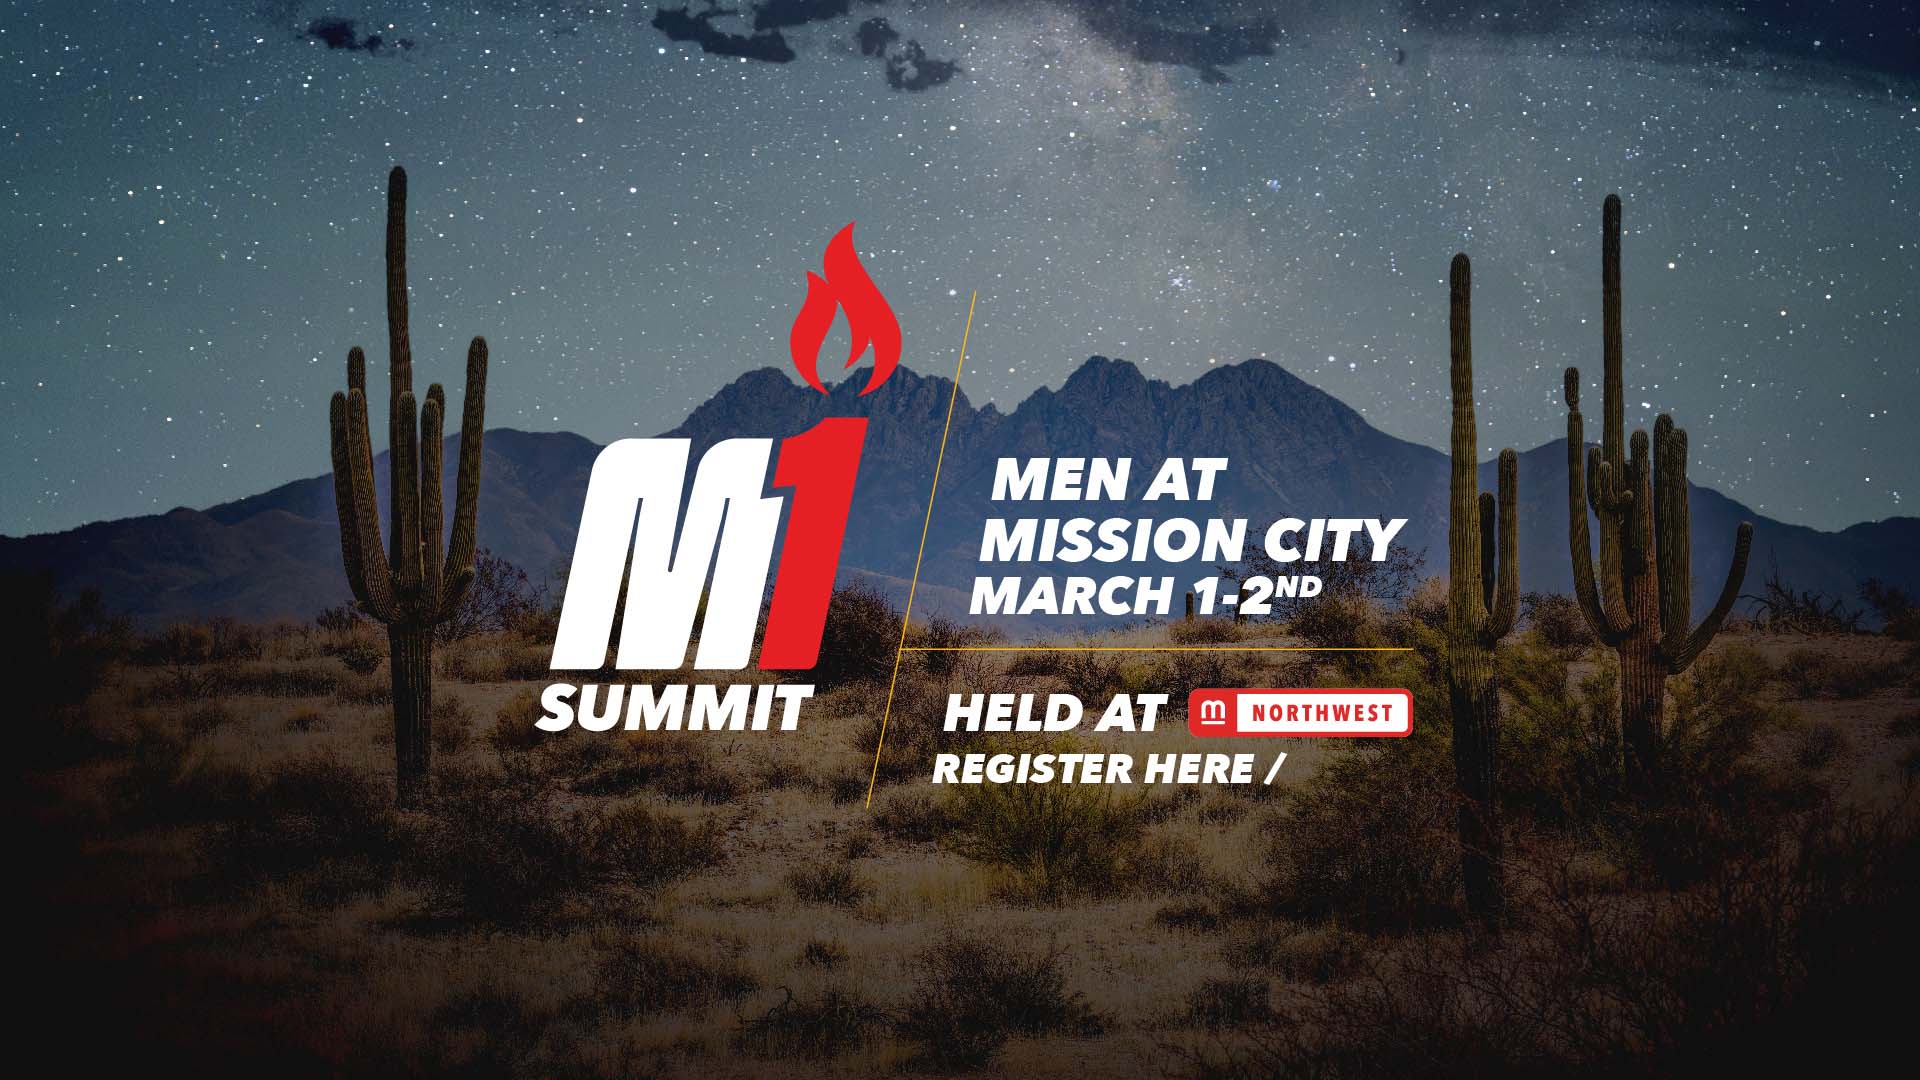 Men's Conference, Man Summit, M1 Groups, Mission City Men's ministry